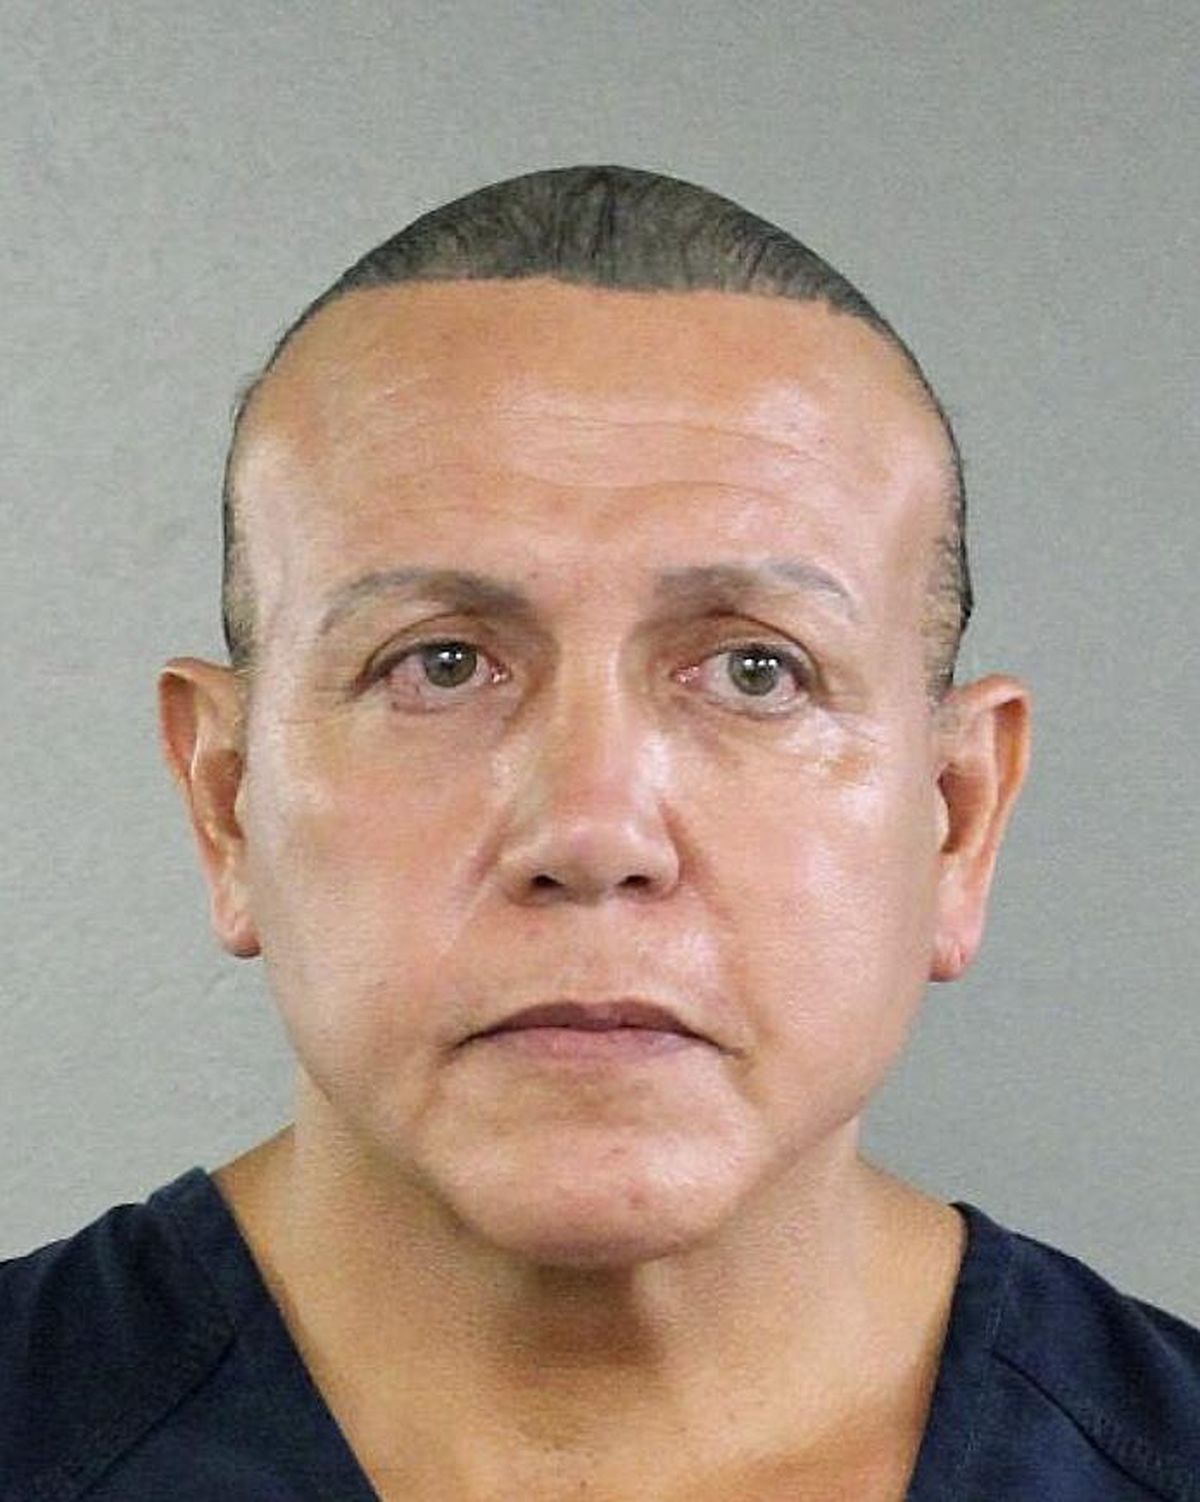 In this undated photo released by the Broward County Sheriff’s office, Cesar Sayoc is seen in a booking photo, in Miami. Federal authorities took Sayoc, 56, of Aventura, Fla., into custody Friday, Oct. 26, 2018 in Florida in connection with the mail-bomb scare that earlier widened to 12 suspicious packages, the FBI and Justice Department said. (AP)